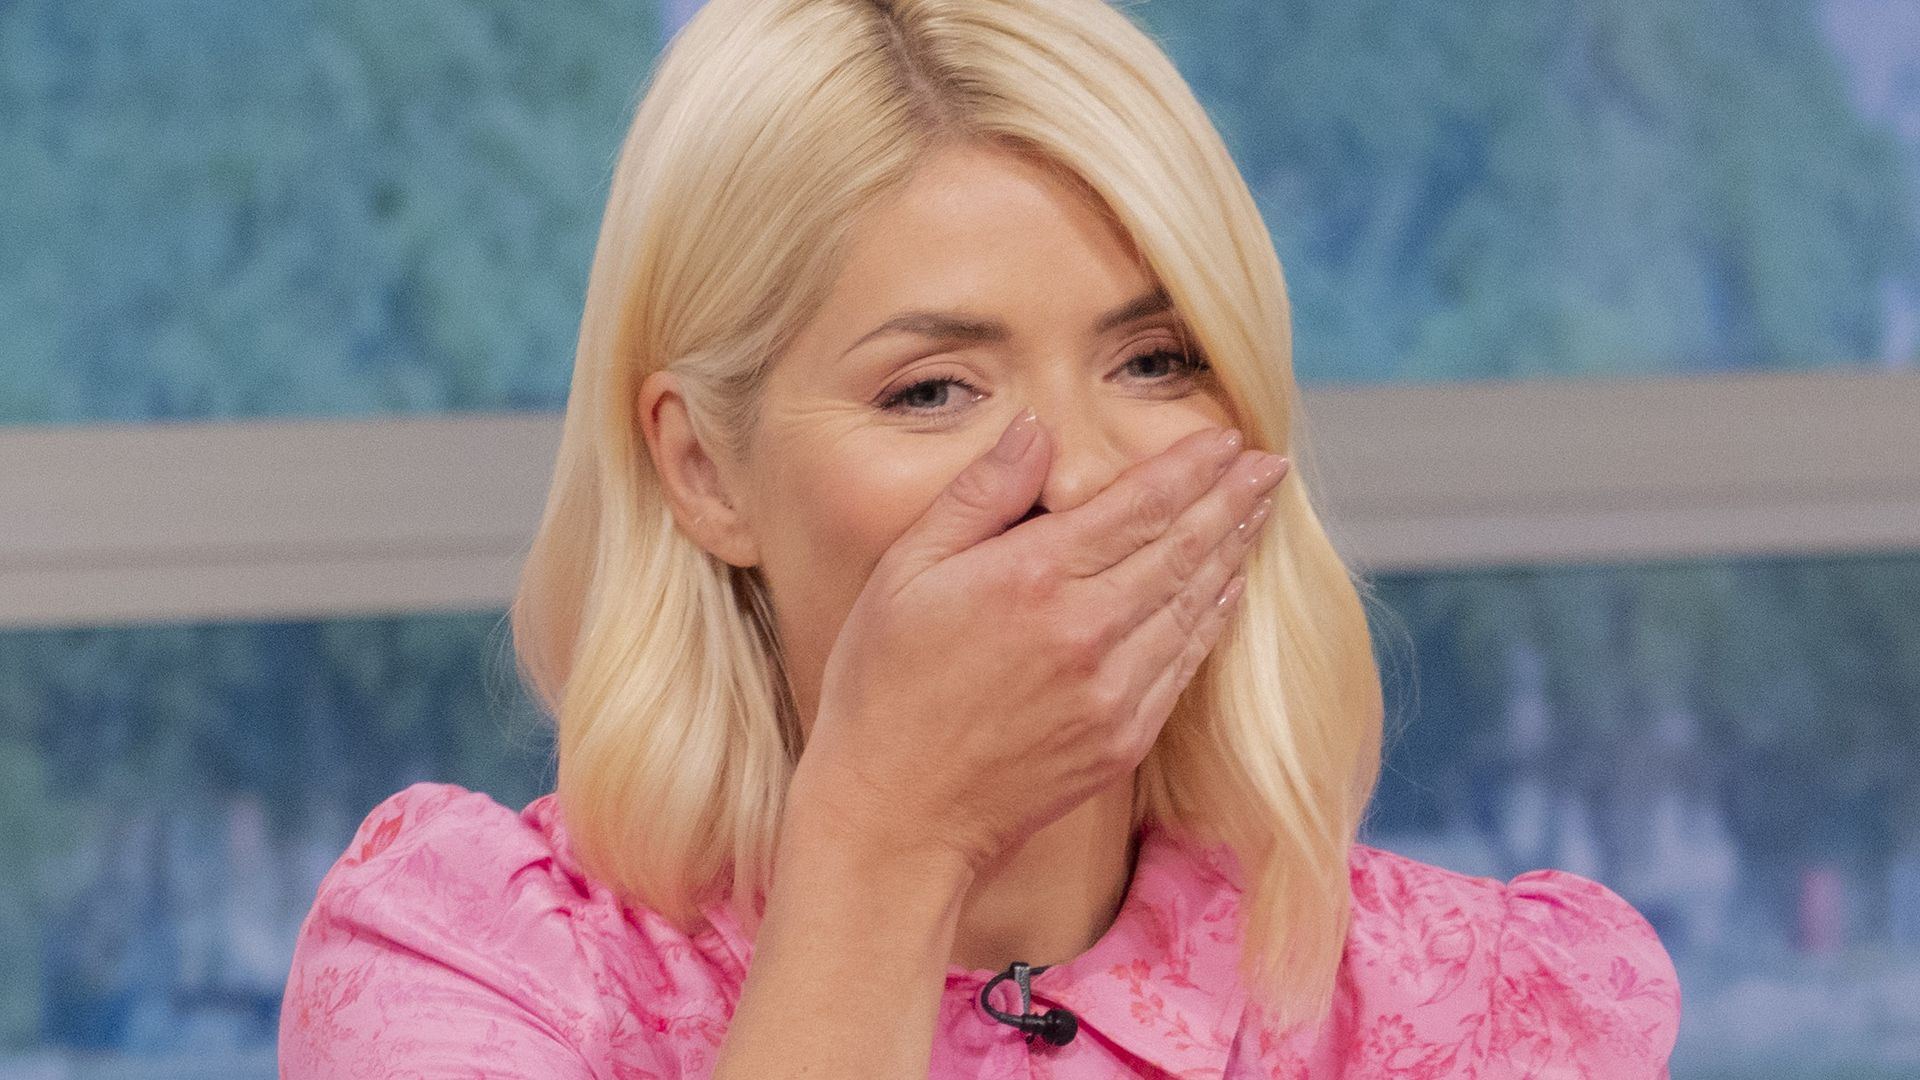 Holly Willoughby holding her hand to her face